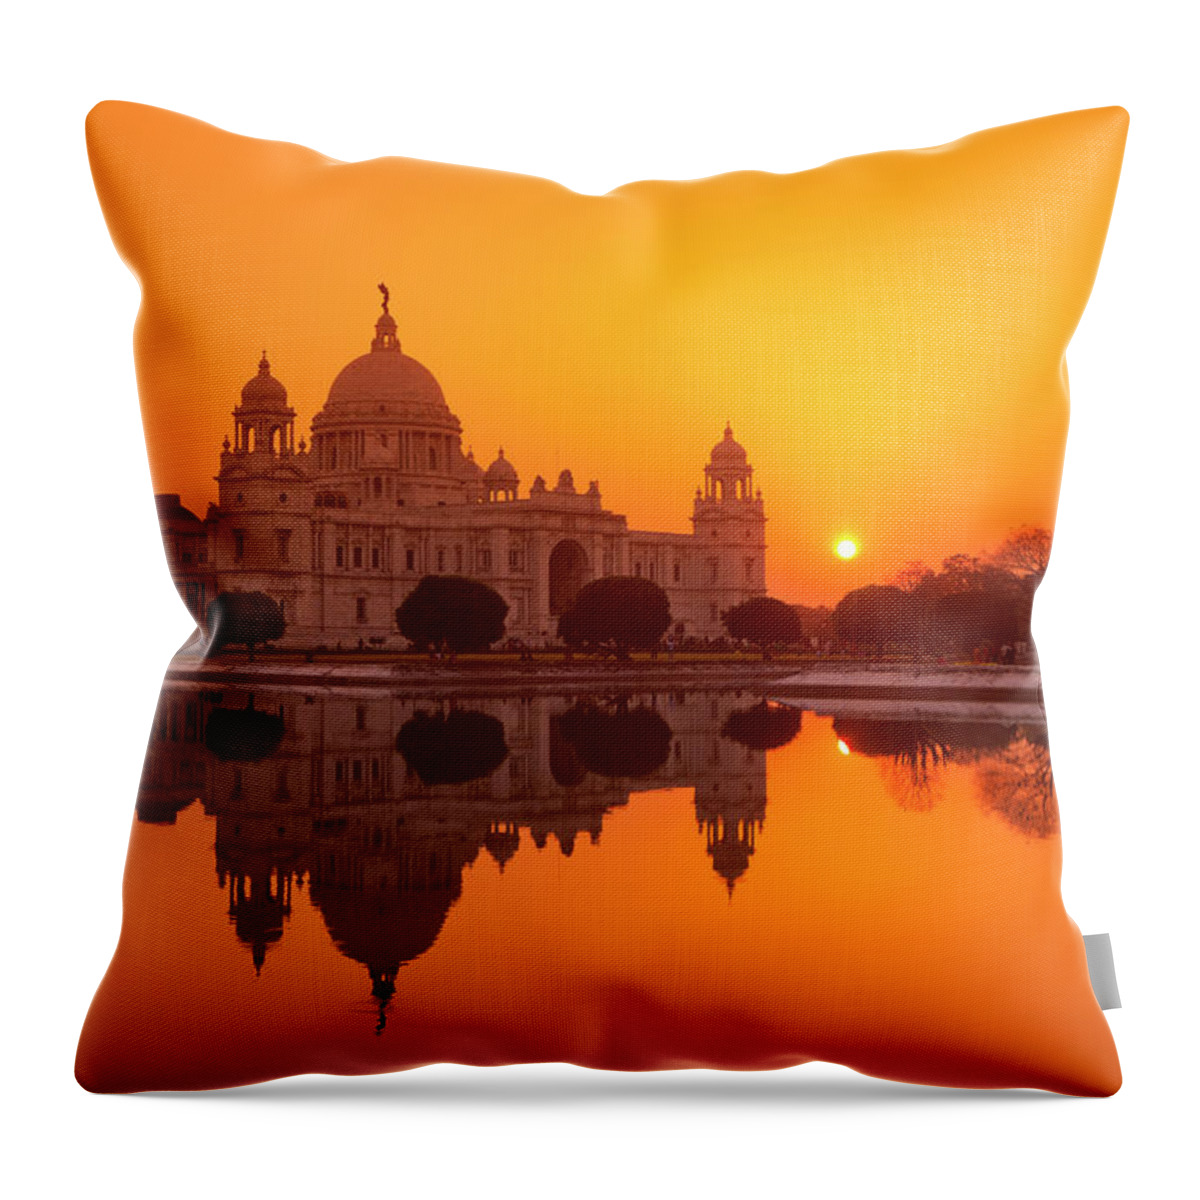 Victoria Memorial Throw Pillow featuring the photograph Sunset At The Victoria Memorial by Adrian Pope